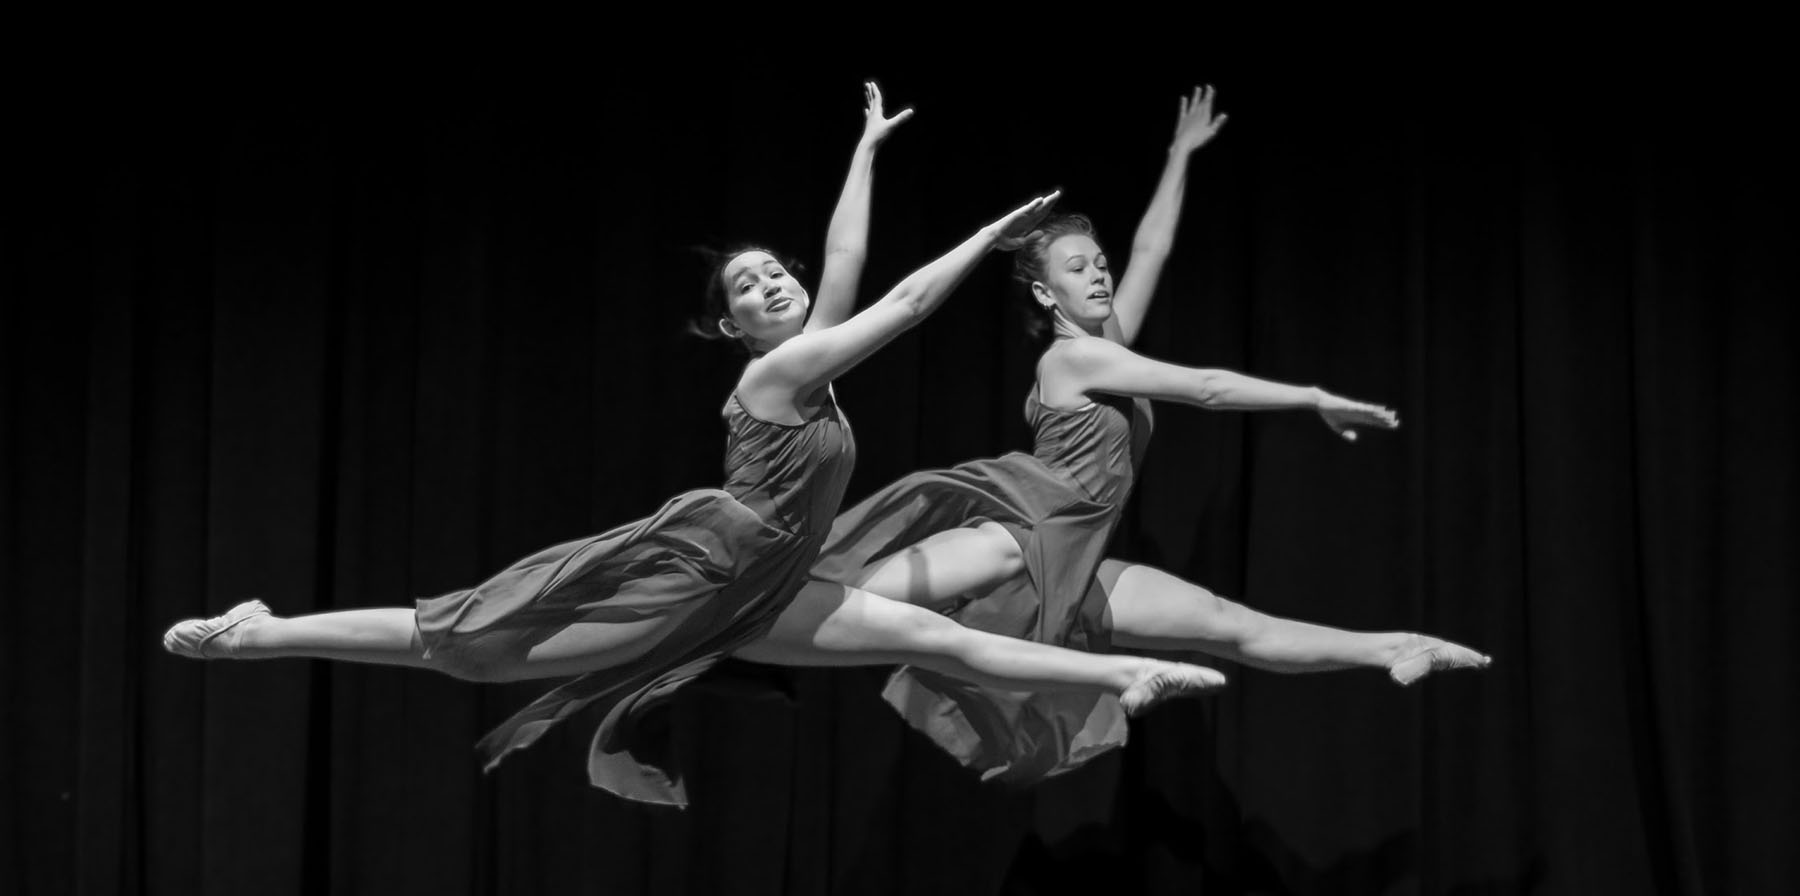 dancers leaping